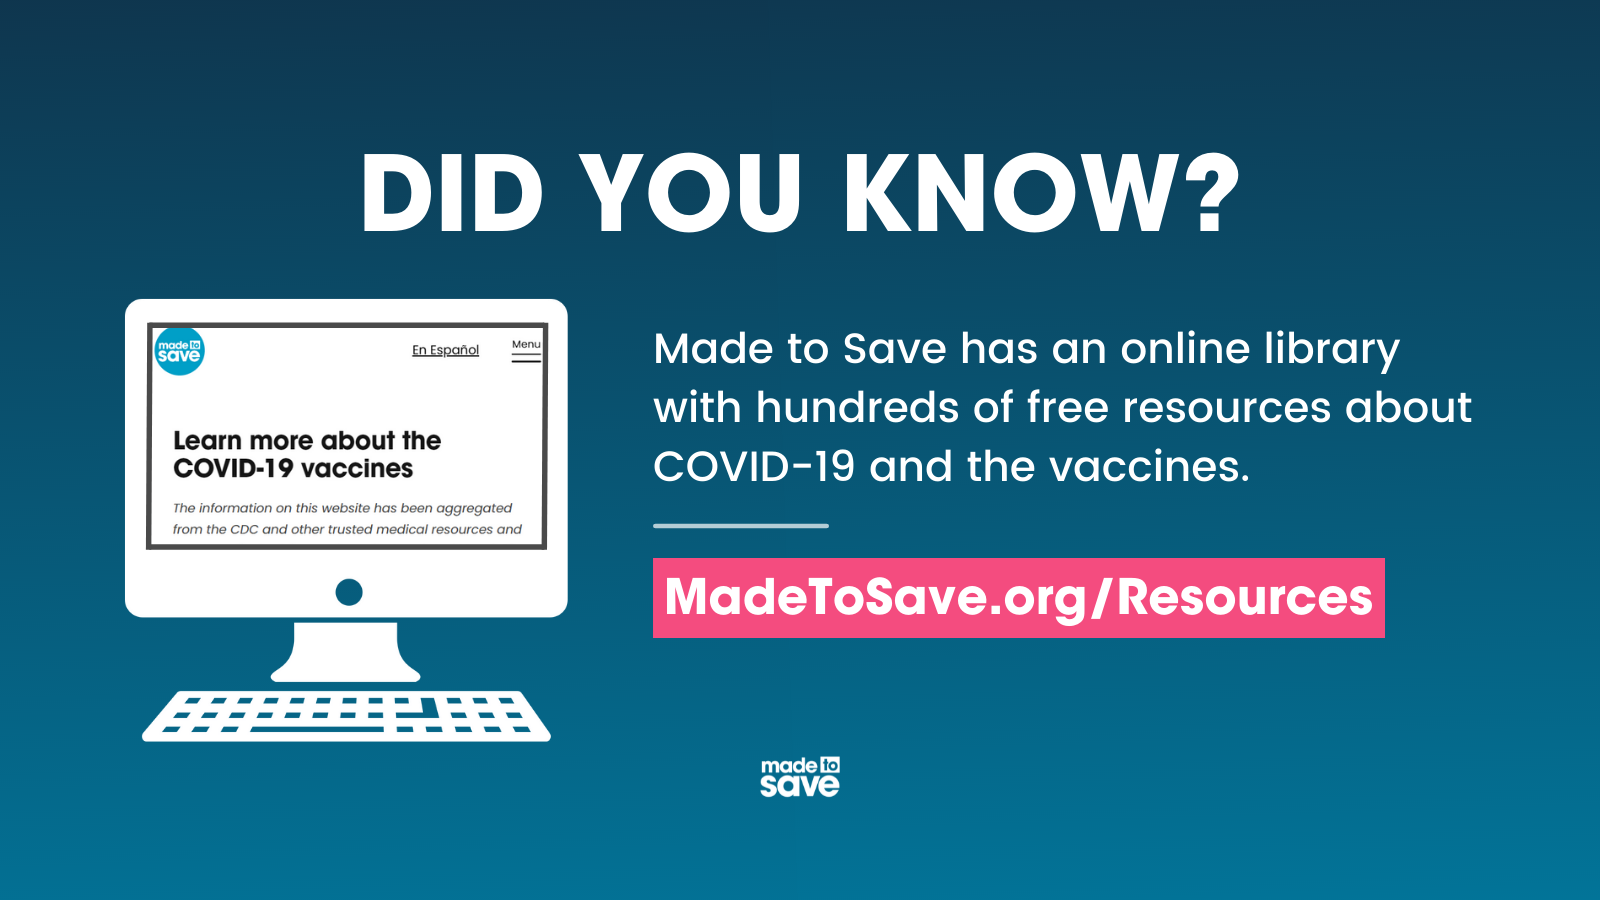 Graphic with dark blue background. The left side of the graphic has an image of the Made to Save Resources webpage. In white text, the graphic says, "Did you know? Made to Save has an online library with hundreds of free resources about COVID-19 and the vaccines." Below in a hot pink rectangle is the Made to Save website (Madetosave.org/resources) in white text. The Made to Save logo is centered at the bottom of the graphic.